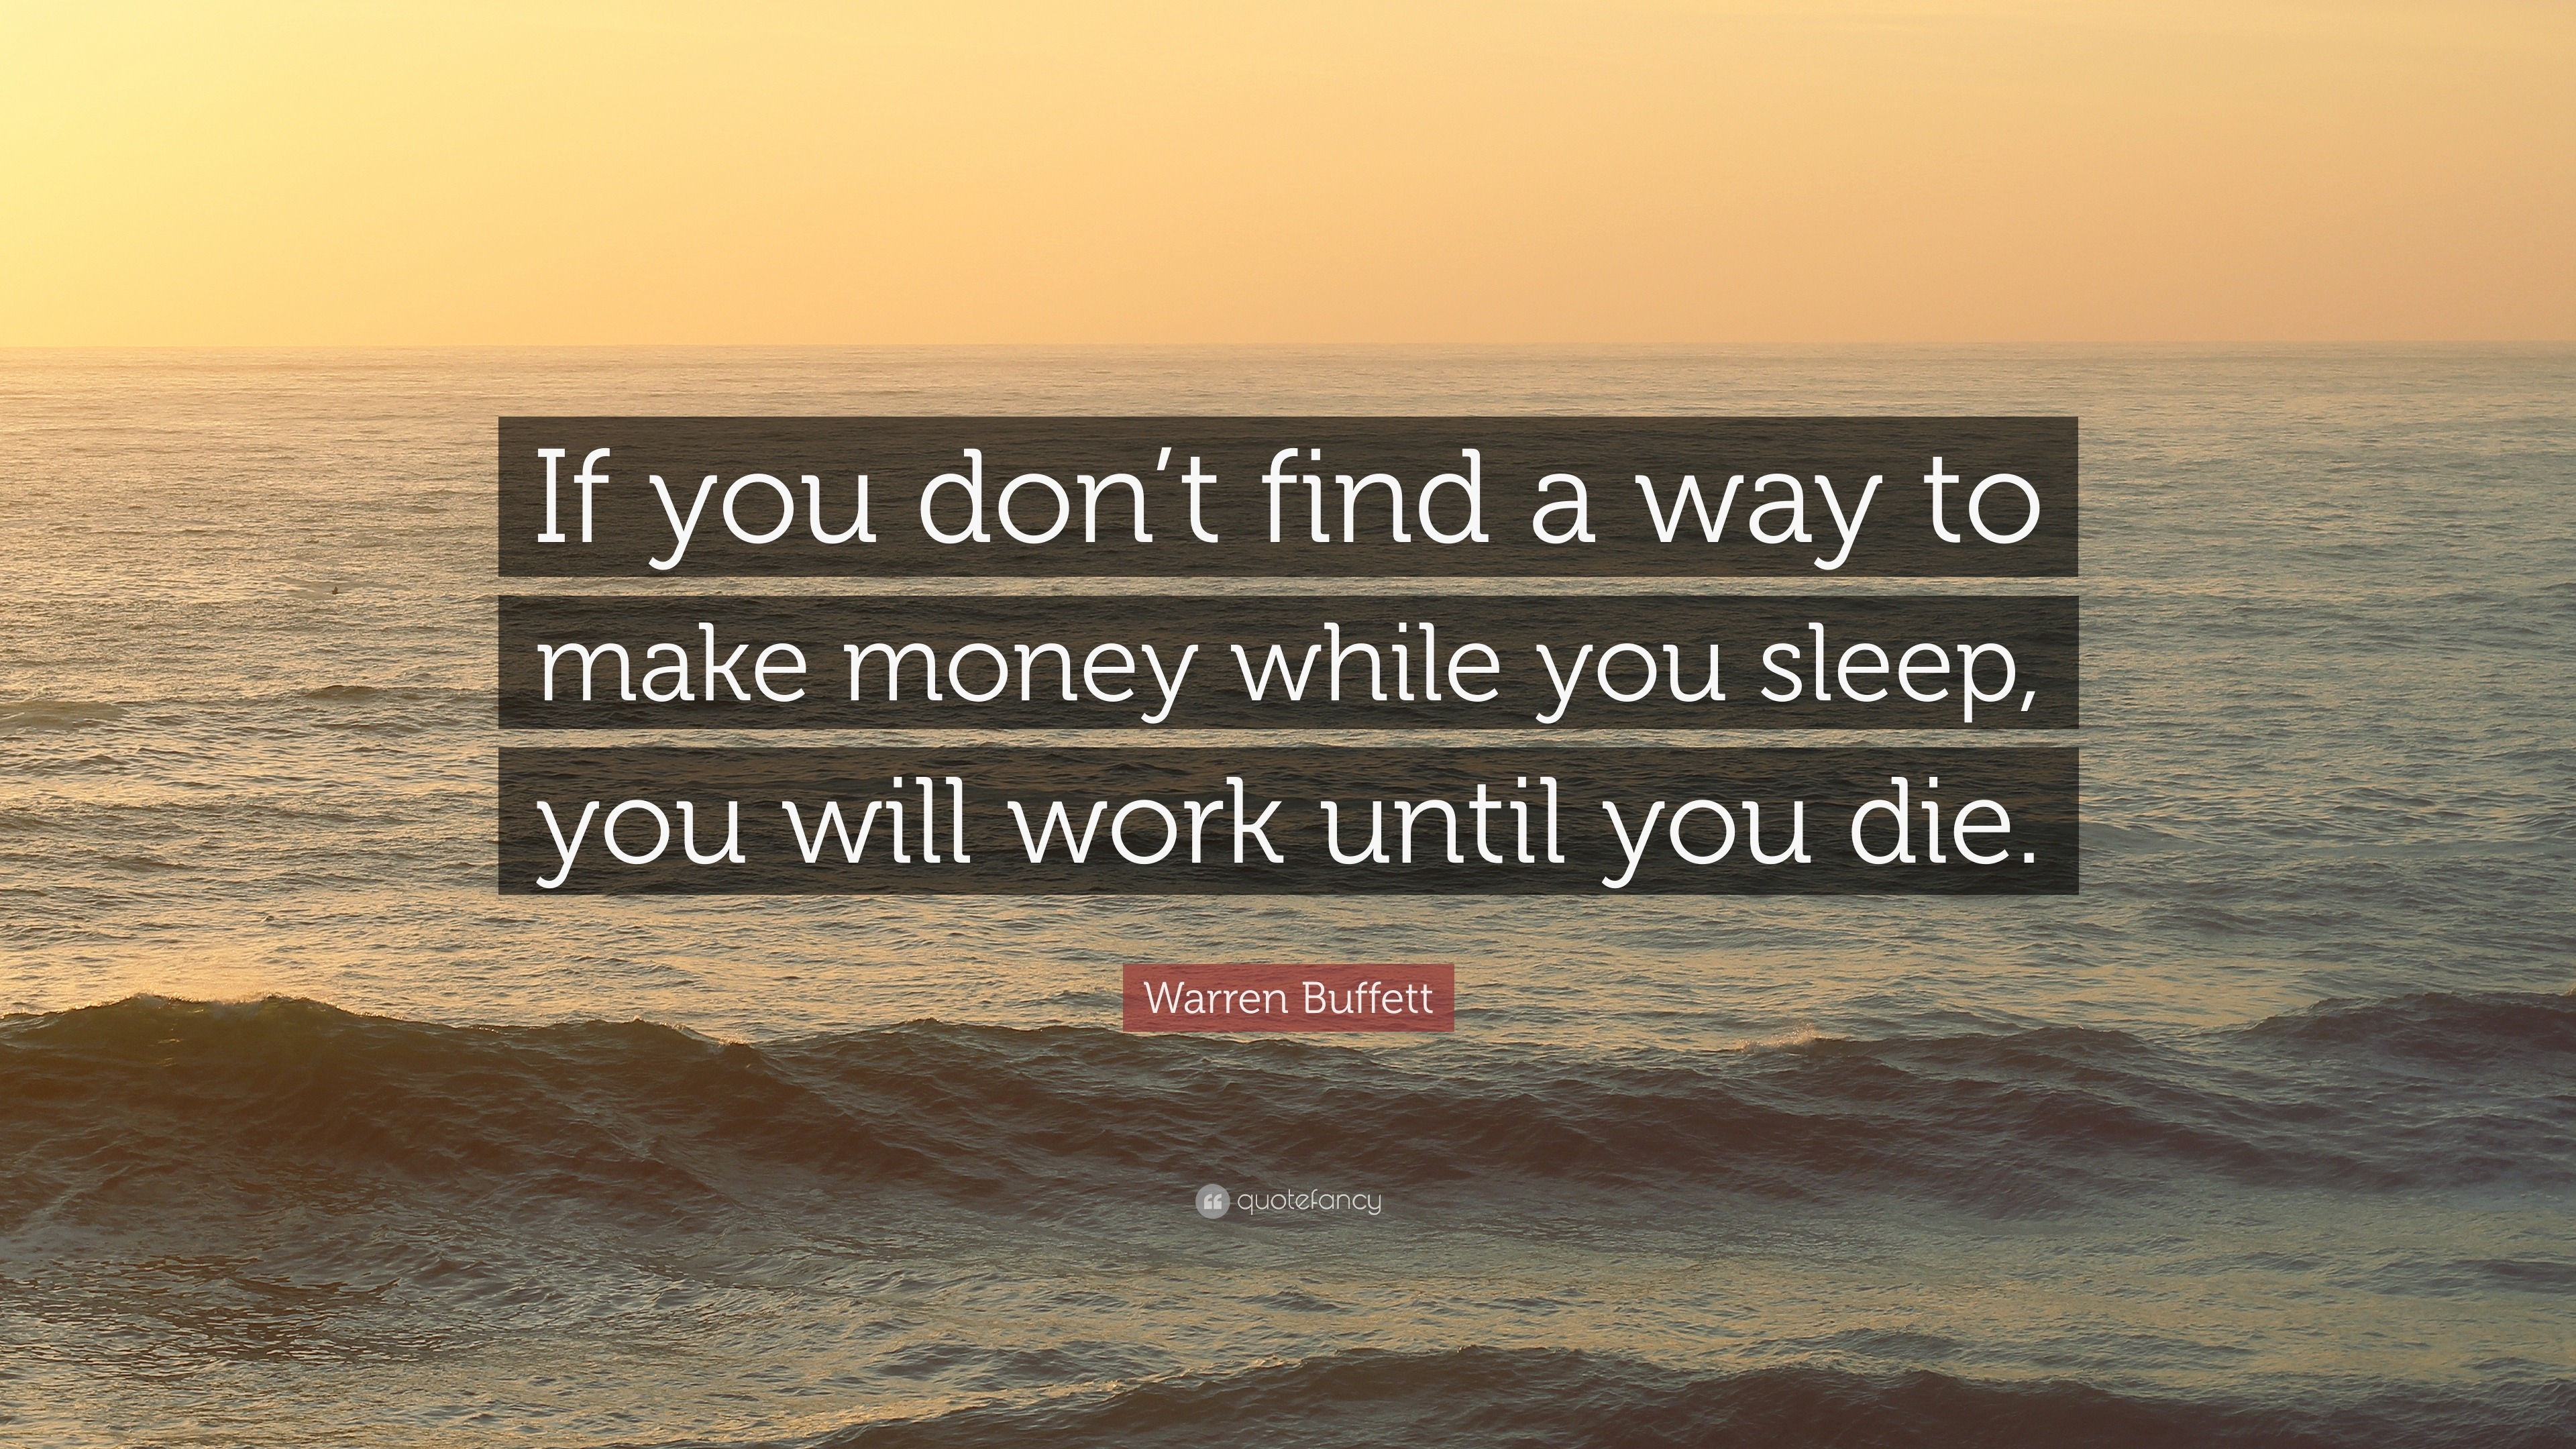 Warren Buffett Quote “If you don t find a way to make money